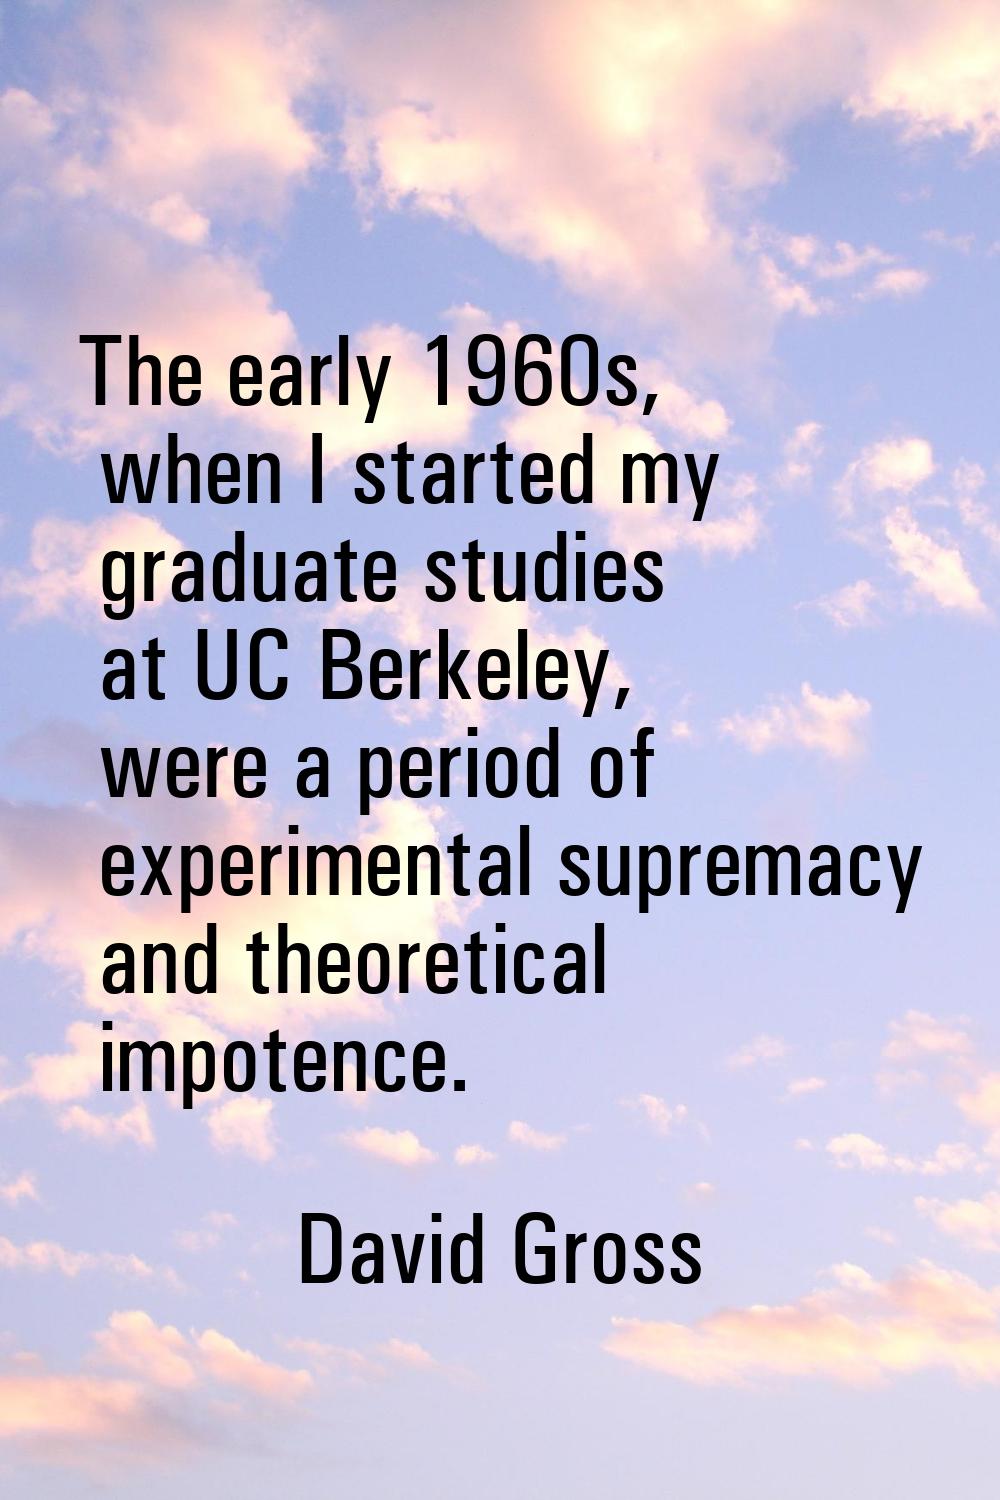 The early 1960s, when I started my graduate studies at UC Berkeley, were a period of experimental s